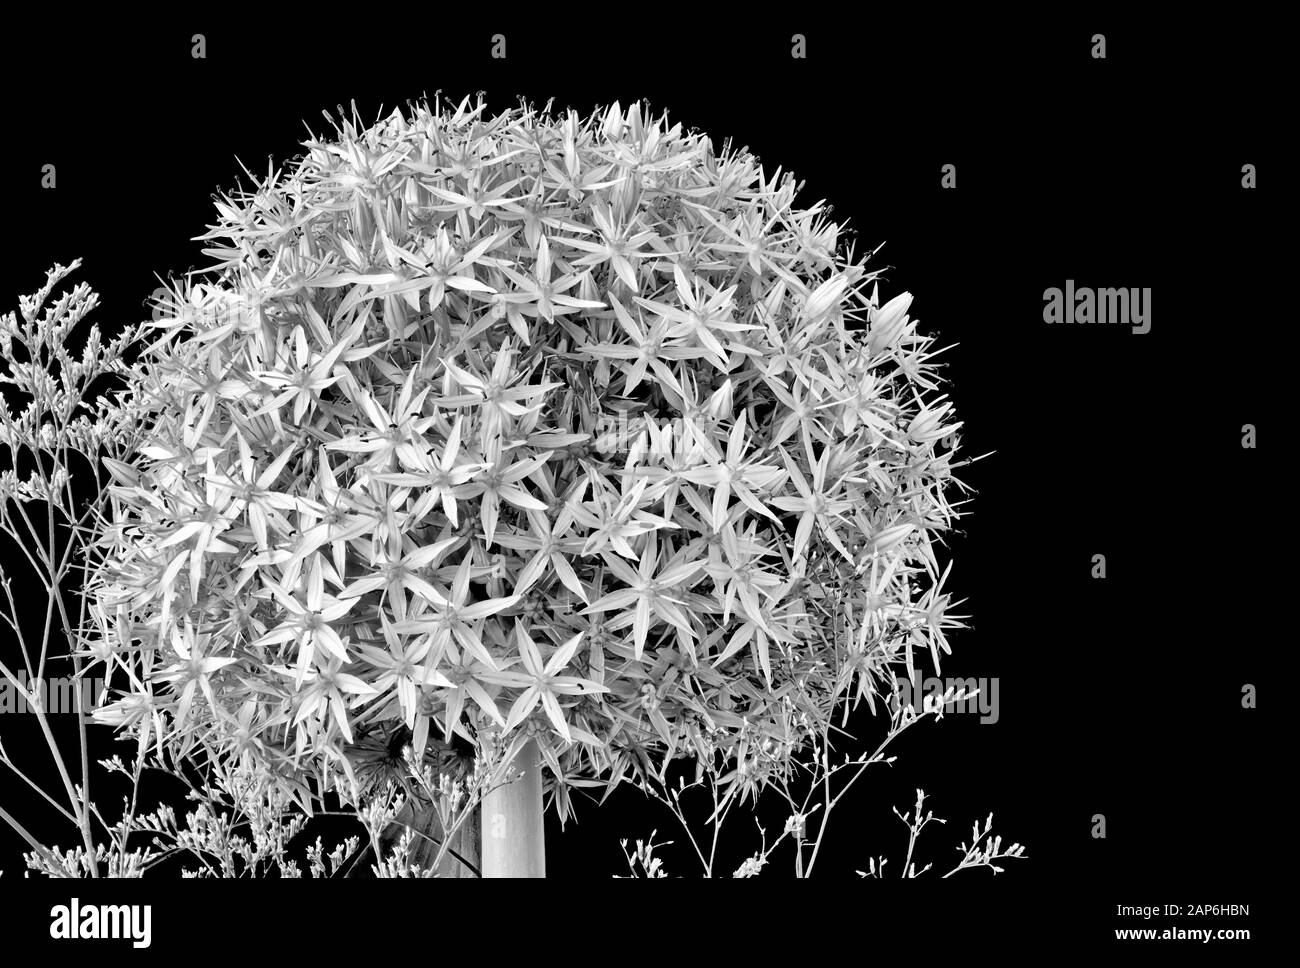 Monochrome bouquet of giant onion blossom with sea-lavender on black background, fine art still life image of an isolated bloom decorated with limoniu Stock Photo